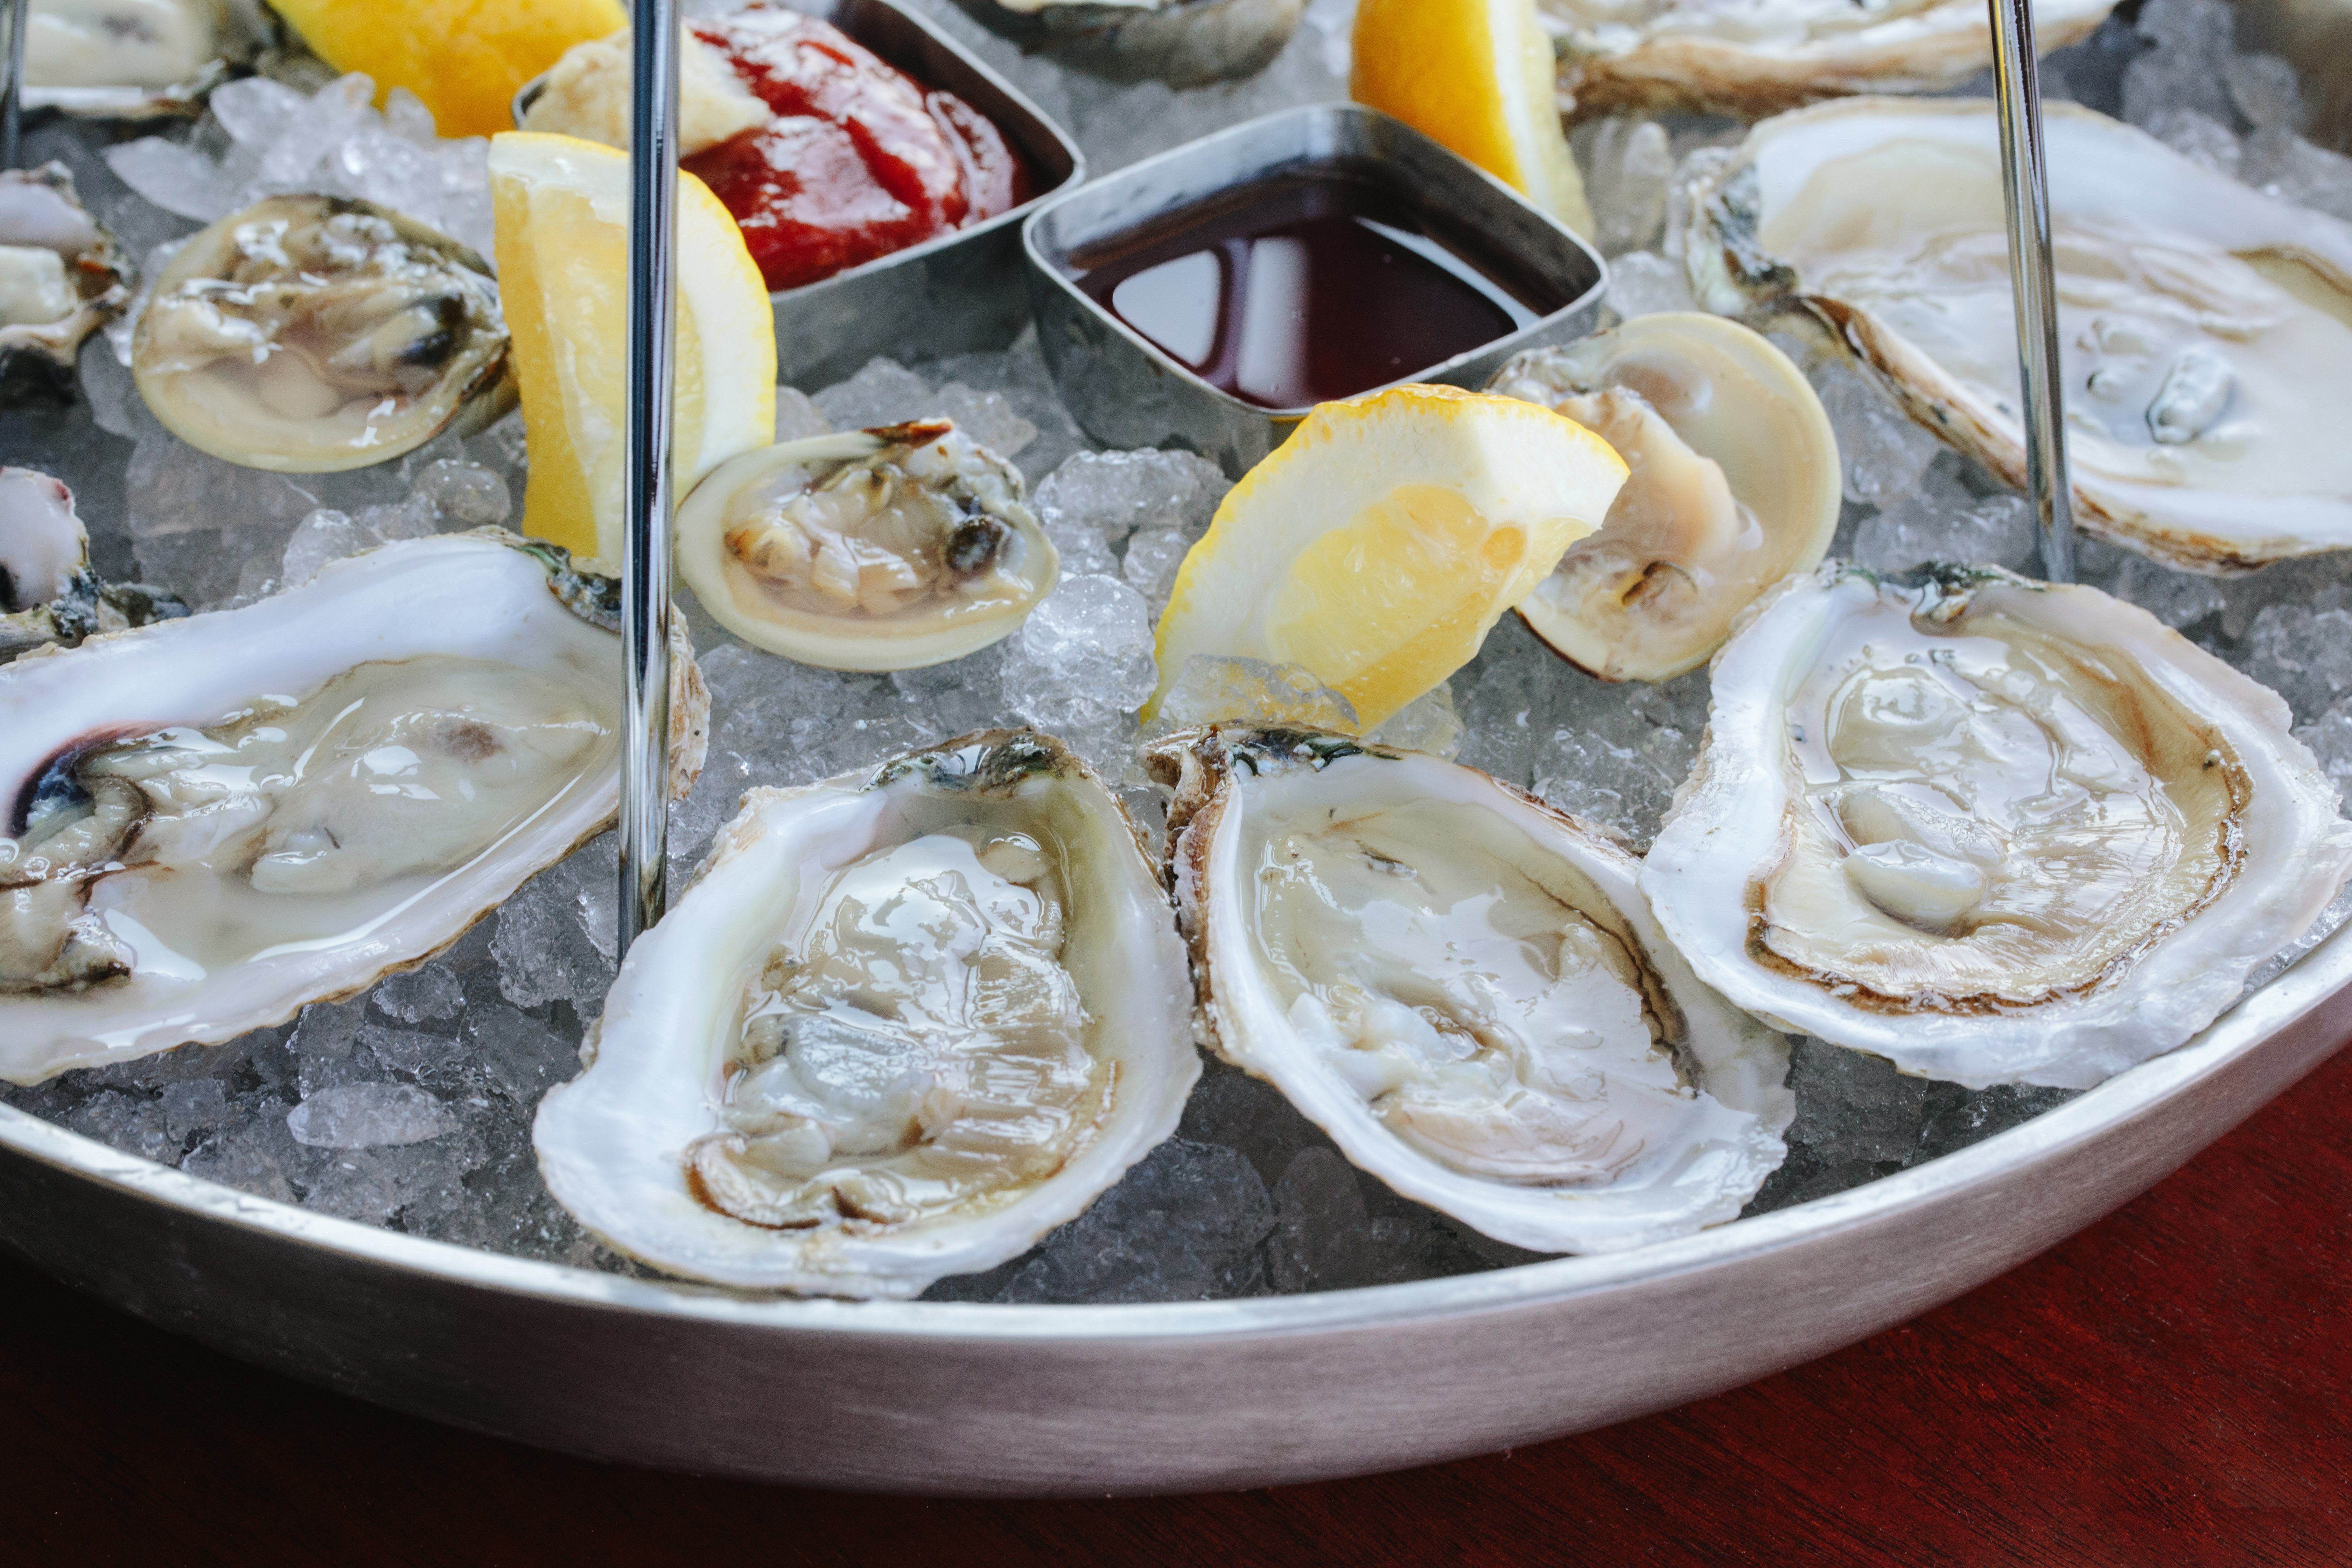 A plate of oysters on the half shell from Reelhouse oyster bar. The oysters are accompanied by mignonette, cocktail sauce, and lemon wedges.